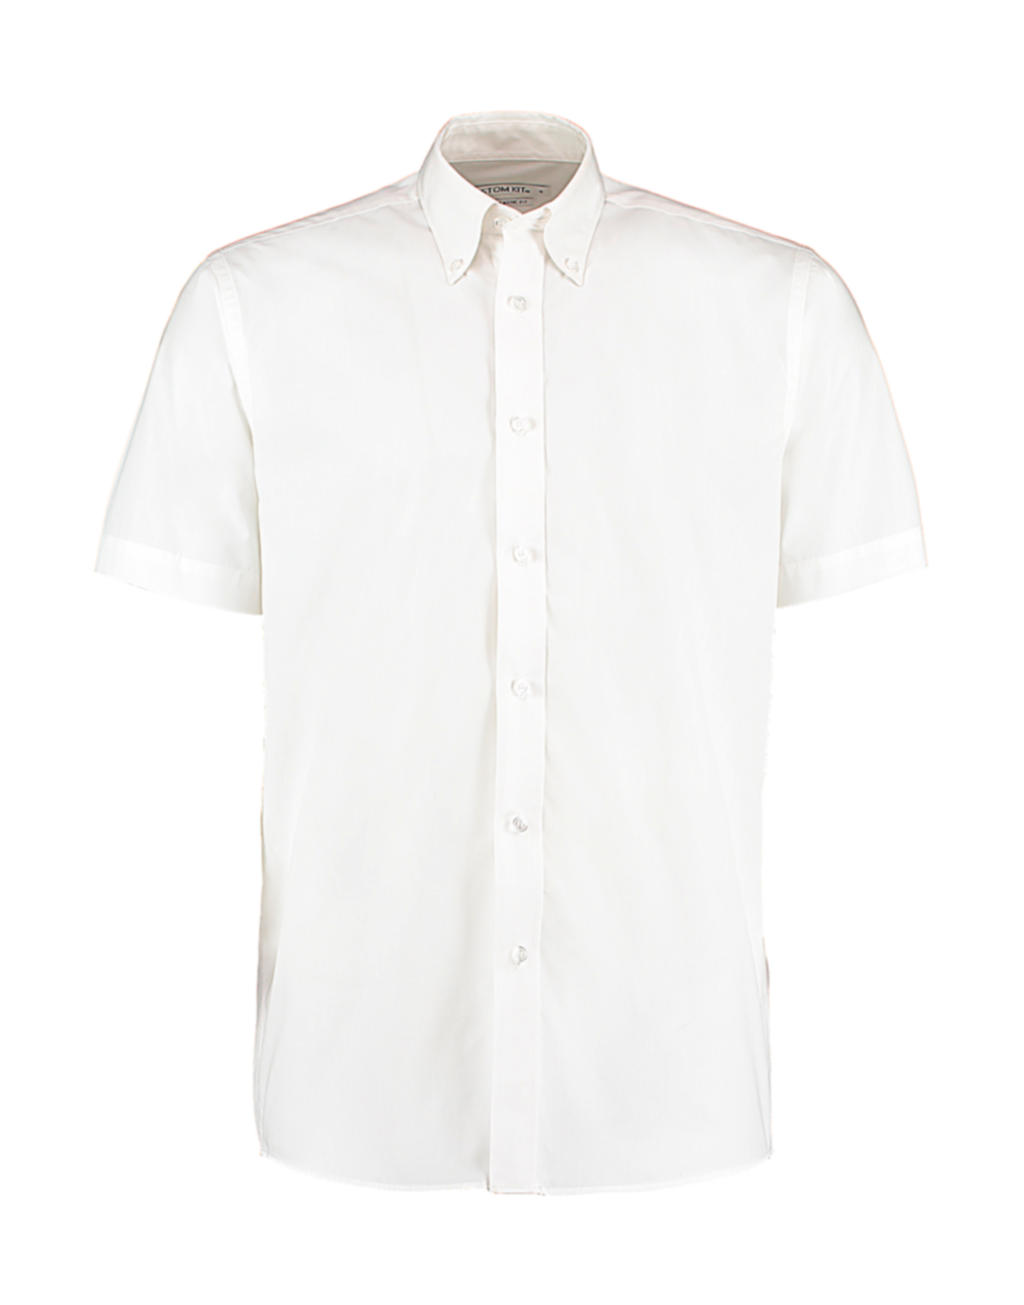  Classic Fit Workforce Shirt in Farbe White